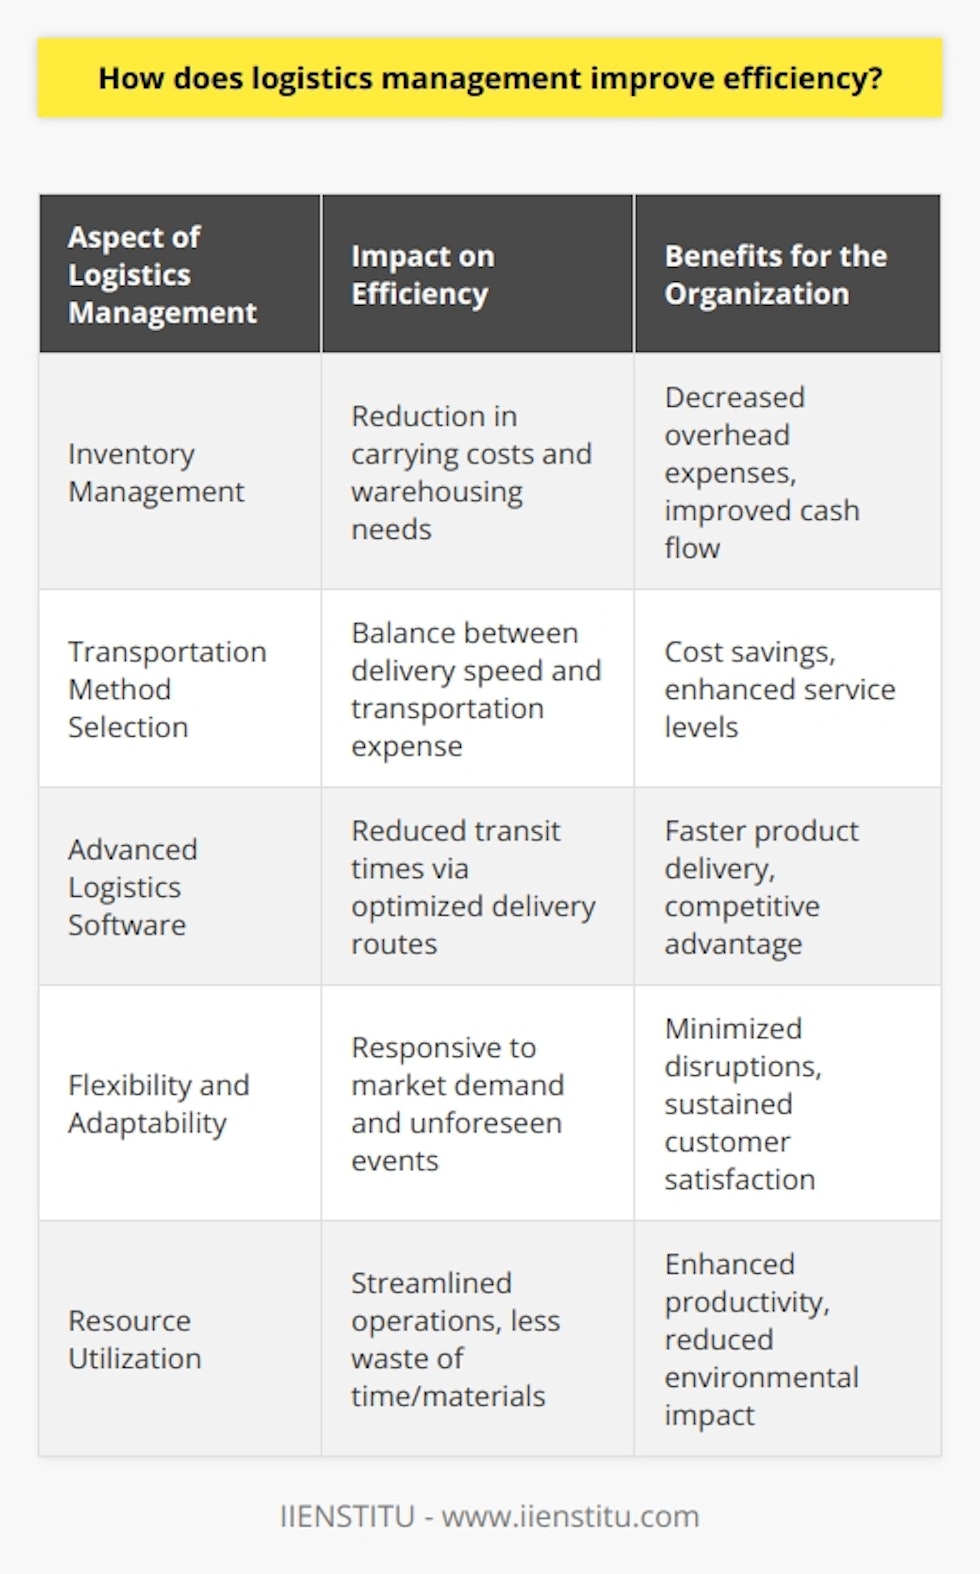 Logistics management is a cornerstone for operational efficiency in any organization that requires the movement of goods. It encompasses all aspects of supply chain management, from procurement to product delivery, and seeks to optimize these processes to ensure cost-effectiveness and prompt service.Efficient logistics management is synonymous with cost reduction. Organizations stand to benefit from decreased expenses in various areas, such as reduced inventory carrying costs due to just-in-time inventory systems that limit stockpiling and decrease warehousing needs. The strategic selection of transportation methods — from sea freight to airfreight or a combination of modalities — allows companies to balance speed and expense. In addition, volume discounts through carrier negotiations, and route optimization to minimize fuel use and maximize truckloads, directly impact the bottom line positively.Moreover, logistics management directly influences the speed of delivery. The implementation of advanced logistics software, equipped with algorithms to find the fastest and most efficient delivery routes, can significantly reduce transit times. Efficient inventory control ensures products are on hand when needed and can be dispatched quickly, further accelerating the delivery process. Enhanced speed not only meets customer expectations for swift service but also serves as a competitive advantage.Flexibility is another critical area where logistics management makes a significant impact. In a dynamic business environment, the ability to adapt to market fluctuations is essential. Logistics management uses predictive analytics and real-time data to forecast demand, allowing organizations to adjust their inventory and supply chain strategies accordingly. This agility ensures that companies can respond to unpredictable consumer trends, economic shifts, and even disruptions due to unforeseen events like natural disasters.An optimized logistics operation leads to better resource utilization. This might involve automating certain processes such as warehouse sorting systems or employing decision support systems to aid in transportation and inventory management. By streamlining operations and diminishing waste — including that of time, material, and human effort — efficiency is naturally enhanced. Additionally, as companies move towards green logistics, optimizing resource use takes on an environmental dimension, helping businesses reduce their carbon footprint.In summary, logistics management propels efficiency by curtailing costs, expediting deliveries, offering adaptation flexibility, and optimizing the use of resources. Each of these aspects is critical in ensuring an organization can thrive and sustain itself in a competitive and ever-changing business environment. By prioritizing efficient logistics management, companies can improve service levels, exceed customer expectations, and maintain profitability.